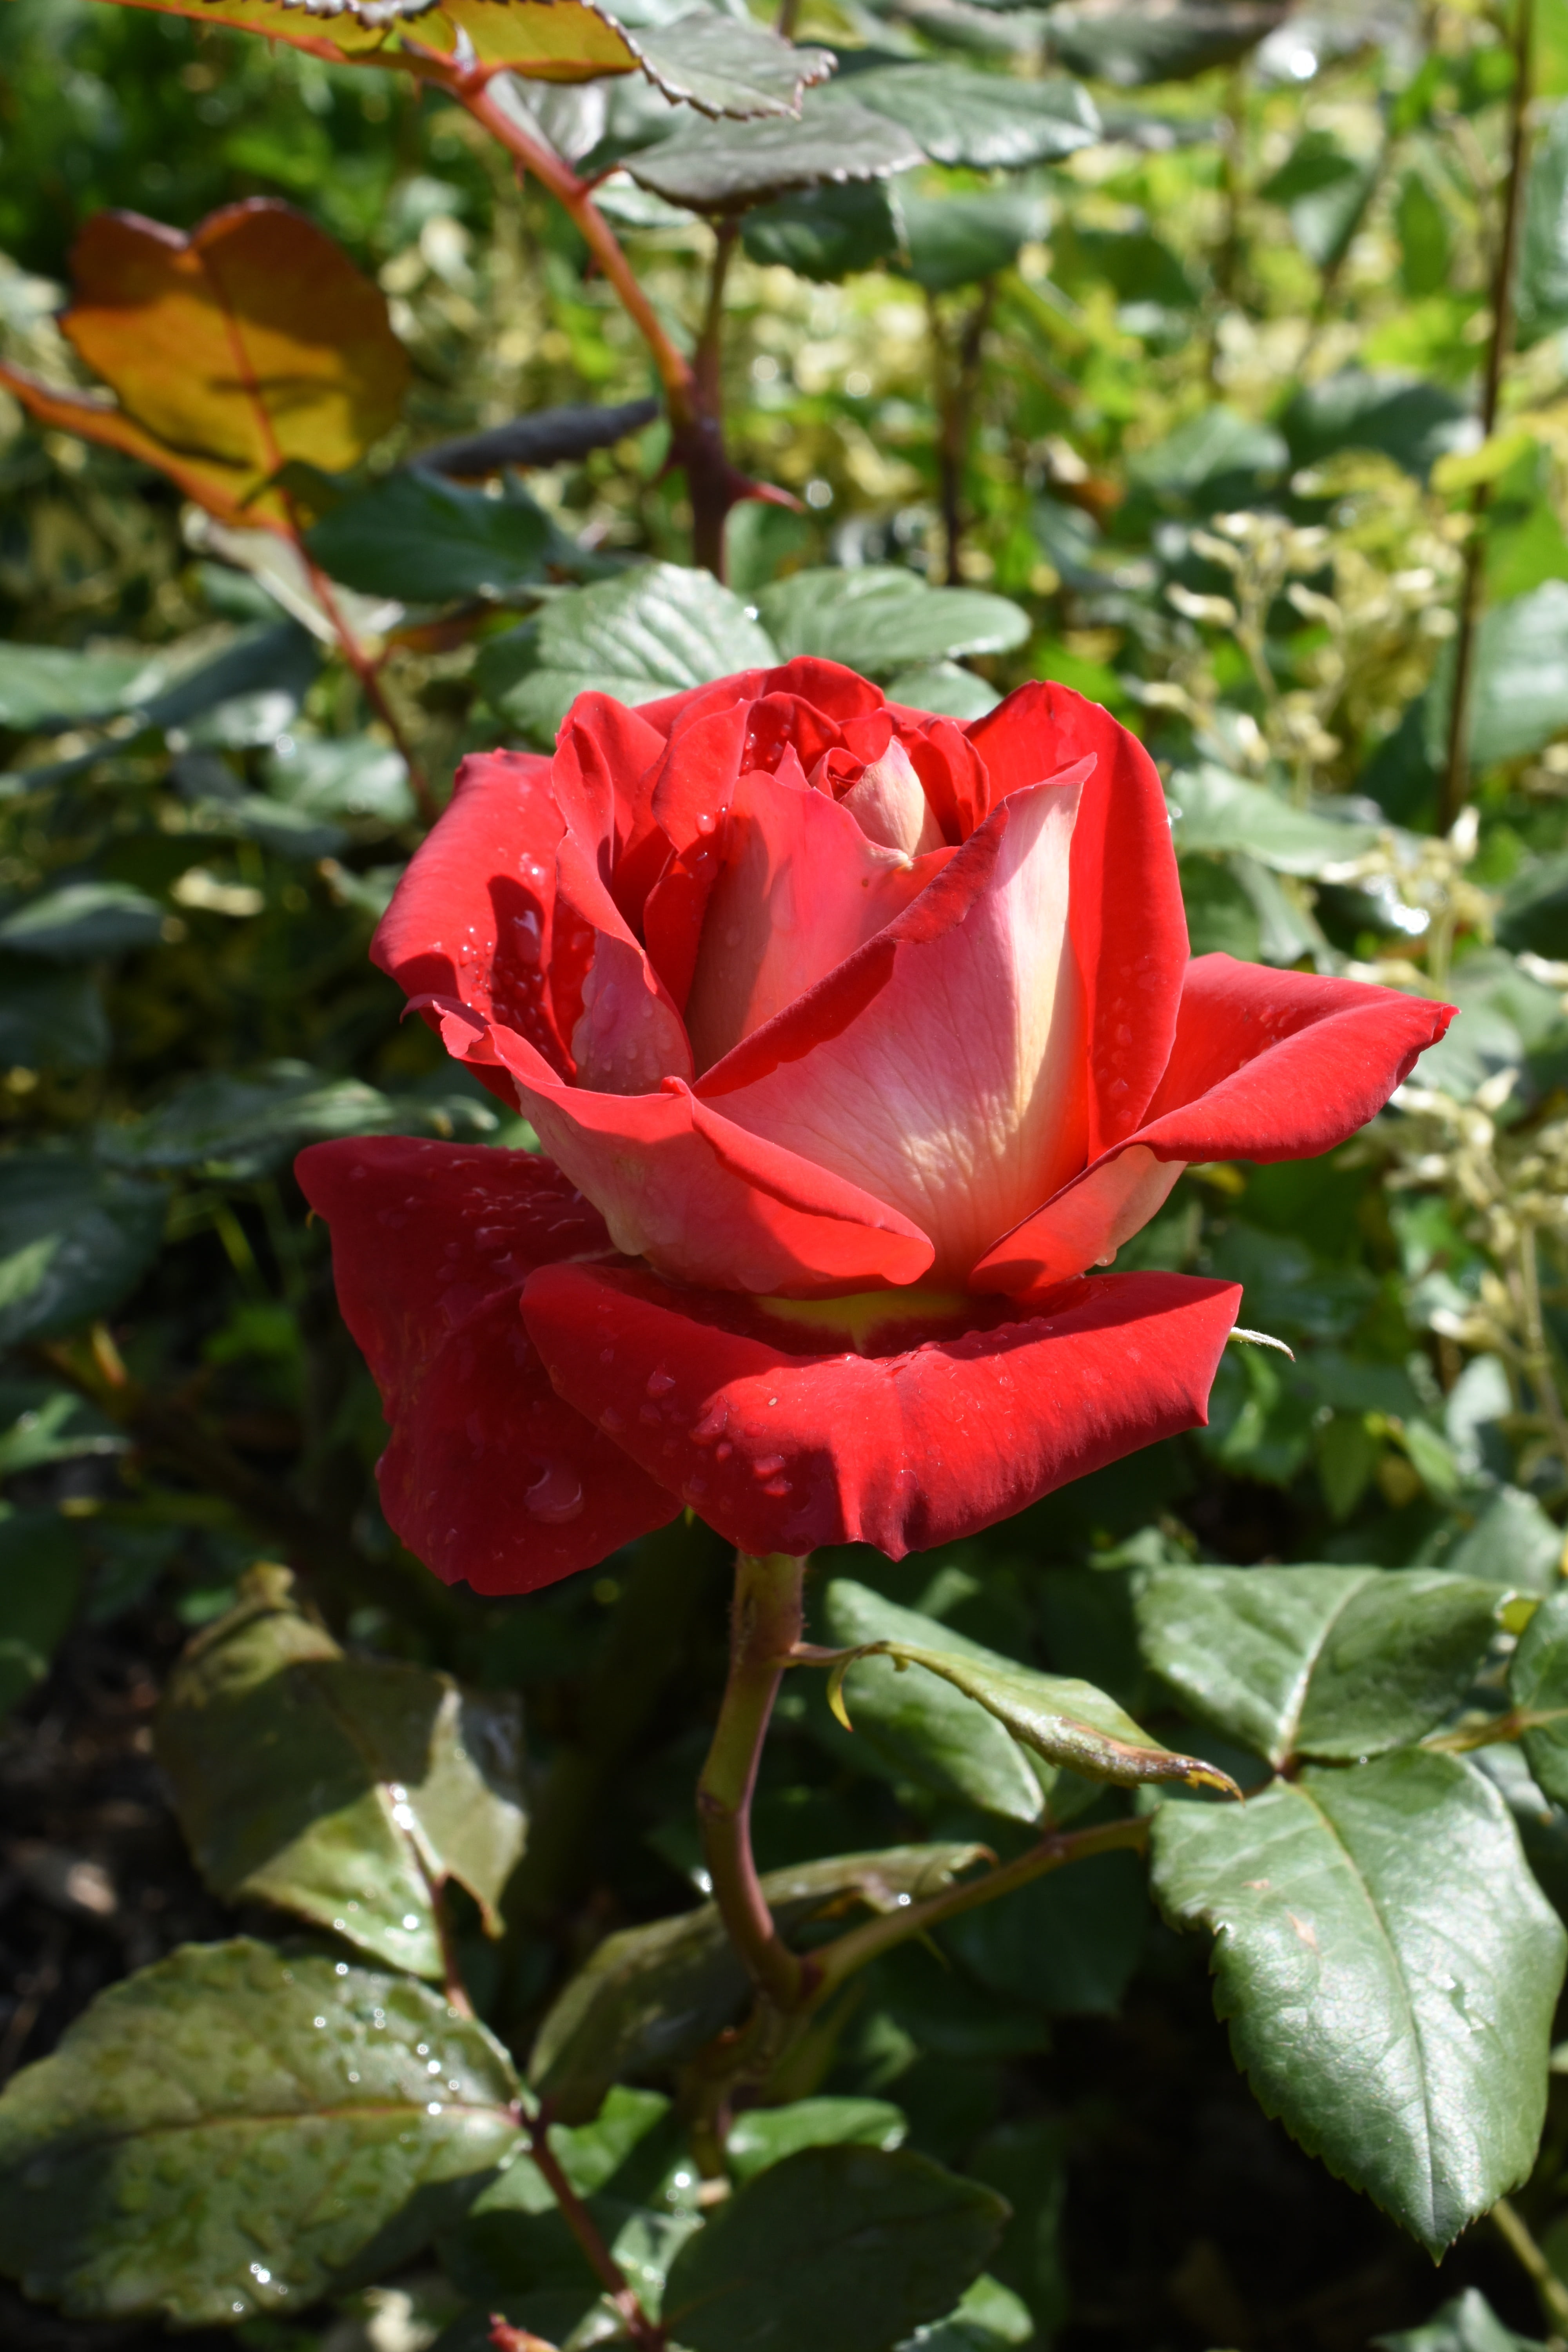 rose, affix, red, may, hangang park, plant, flower, beauty in nature